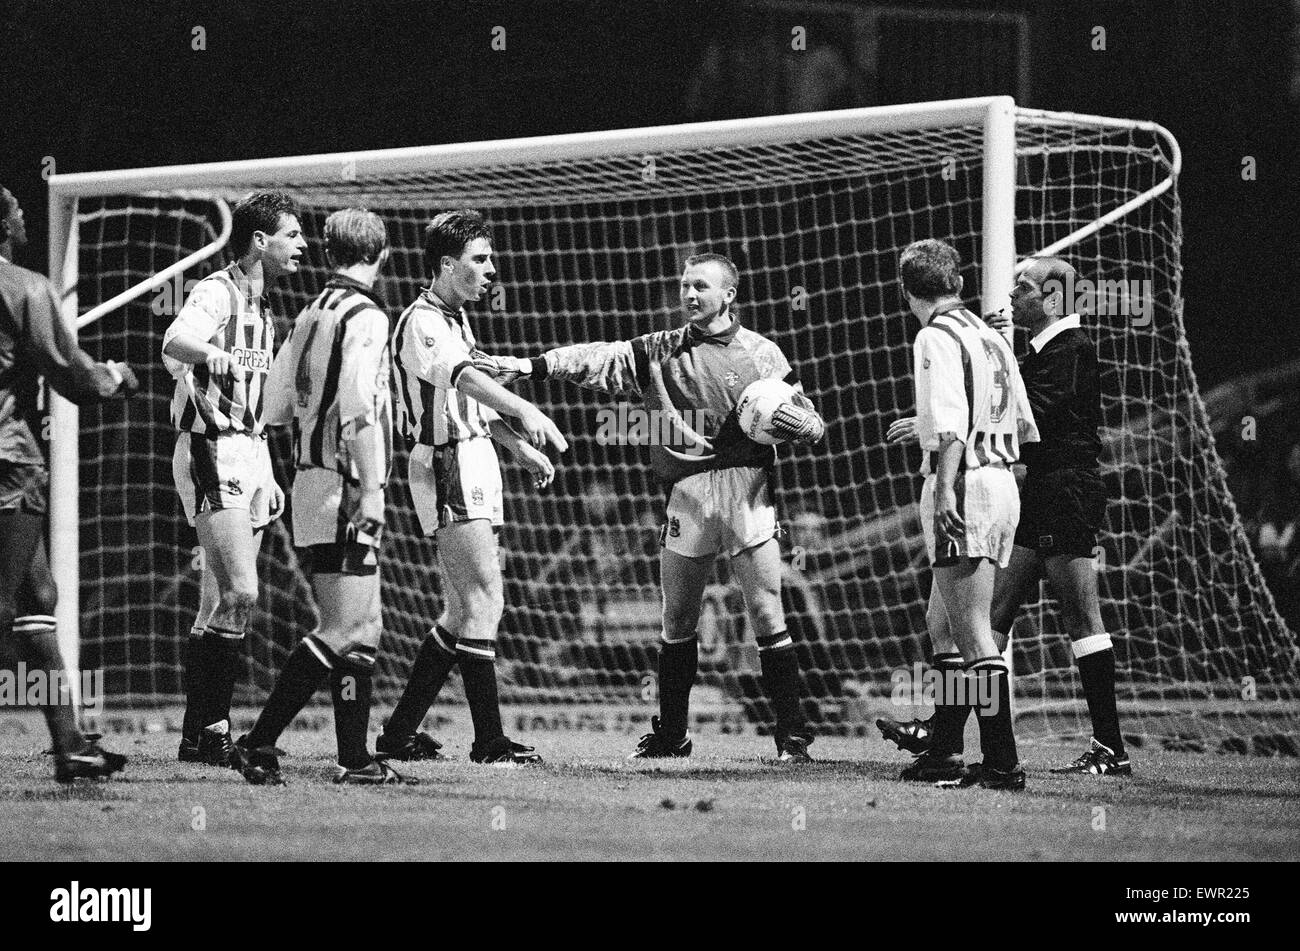 Huddersfield 2-1 Bury, Division 3 League match at Leeds Road, Saturday 22nd December 1990. Kieran O'Regan in goal against Bury after replacing Lee Martin who was sent off. Stock Photo